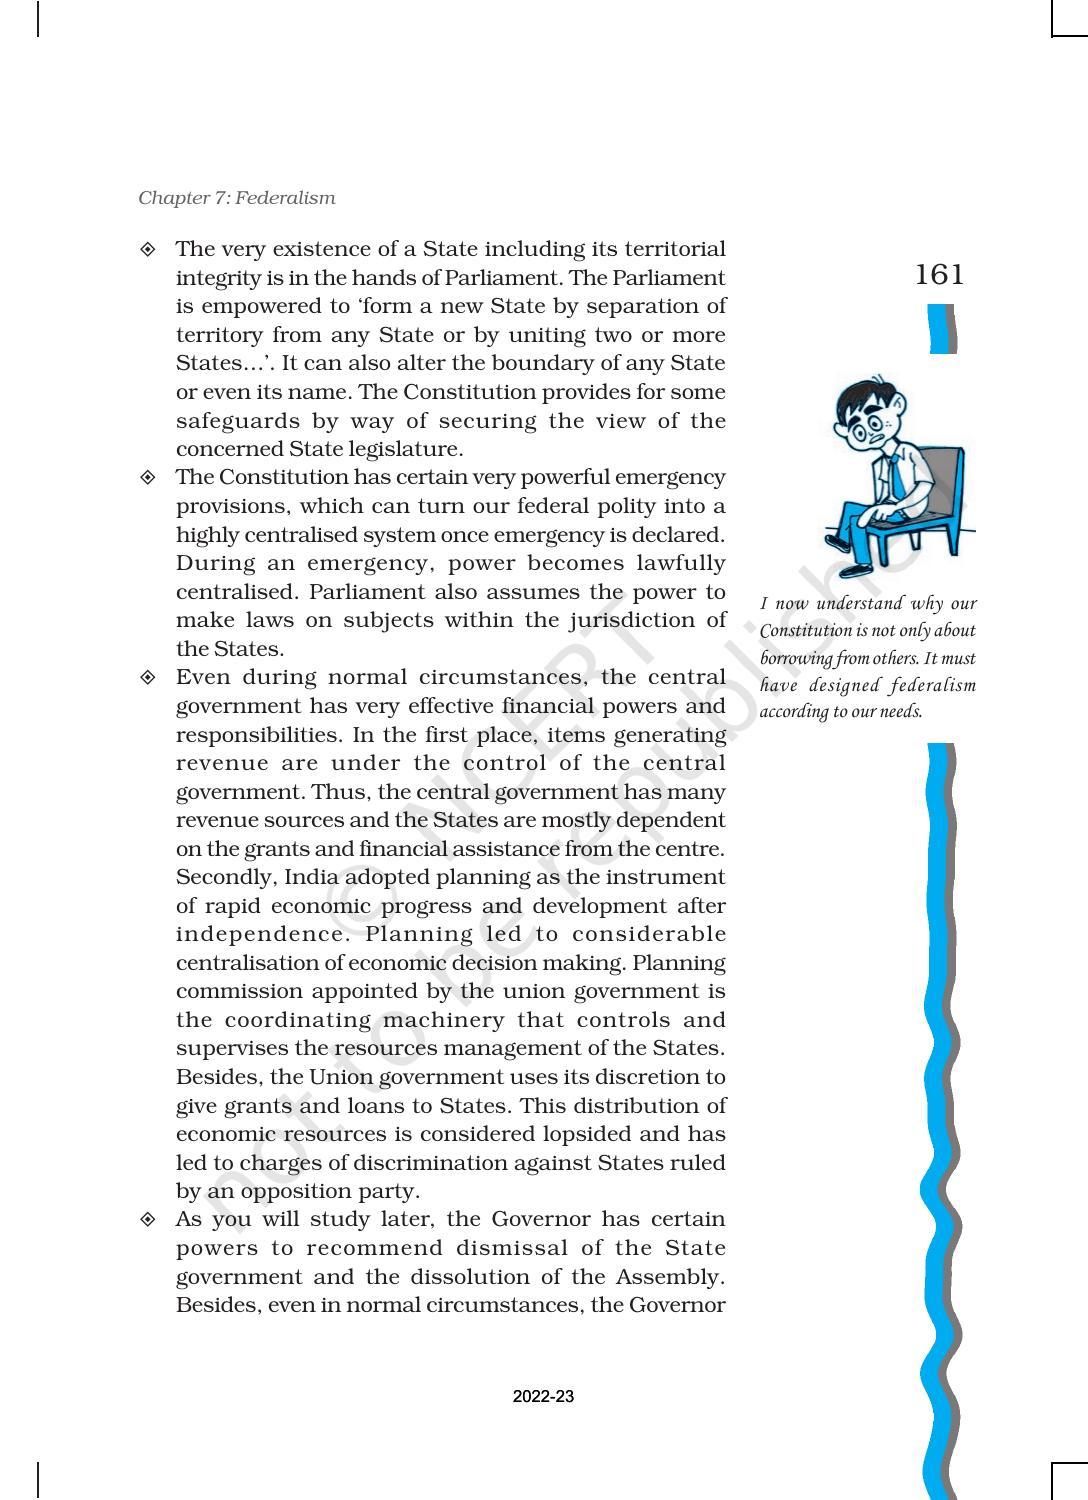 NCERT Book for Class 11 Political Science (Indian Constitution at Work) Chapter 7 Federalism - Page 12